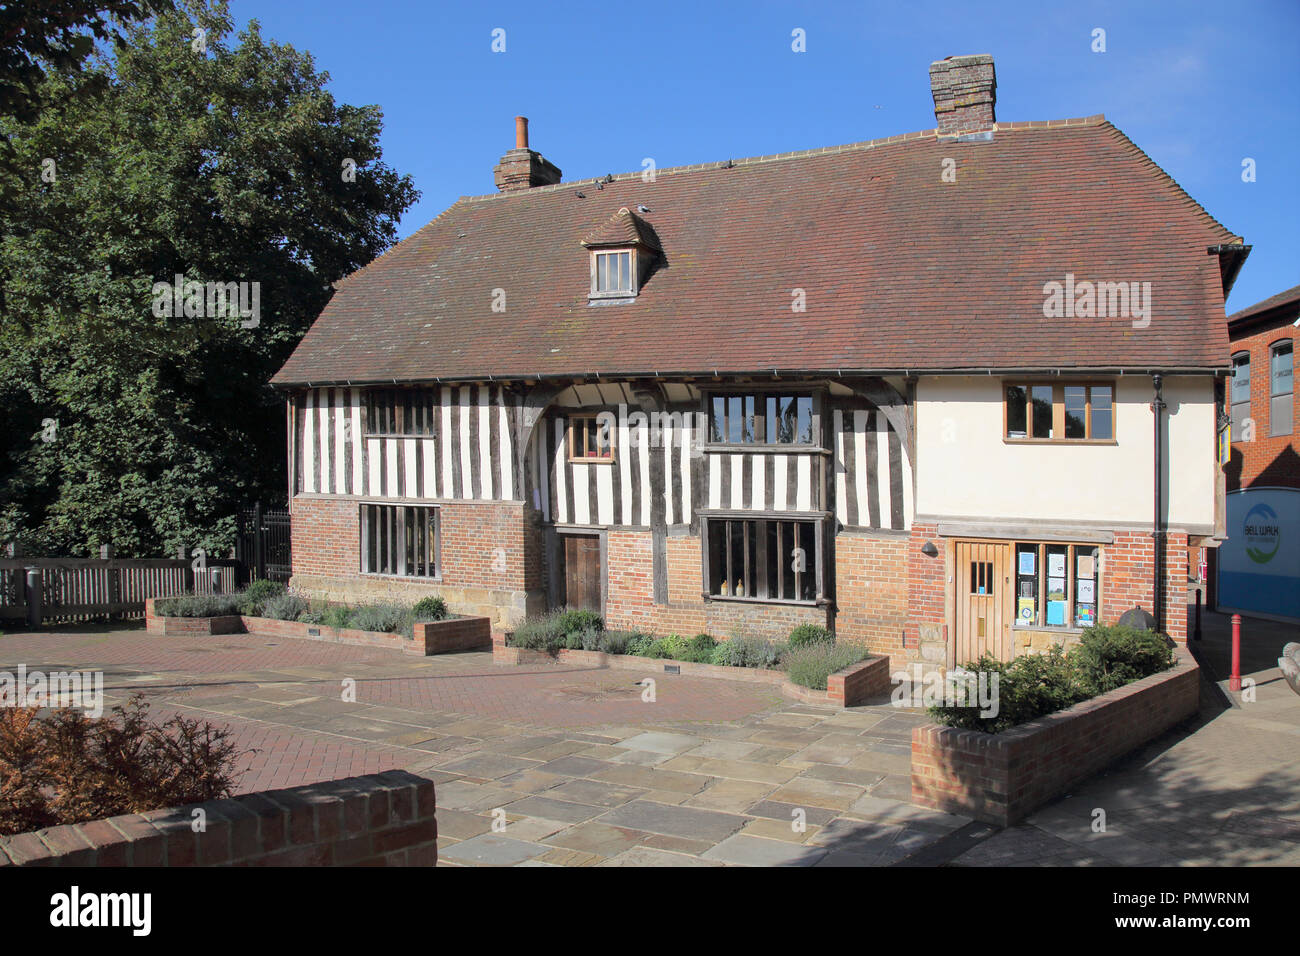 Bridge cottage e museo in Uckfield in east sussex Foto Stock